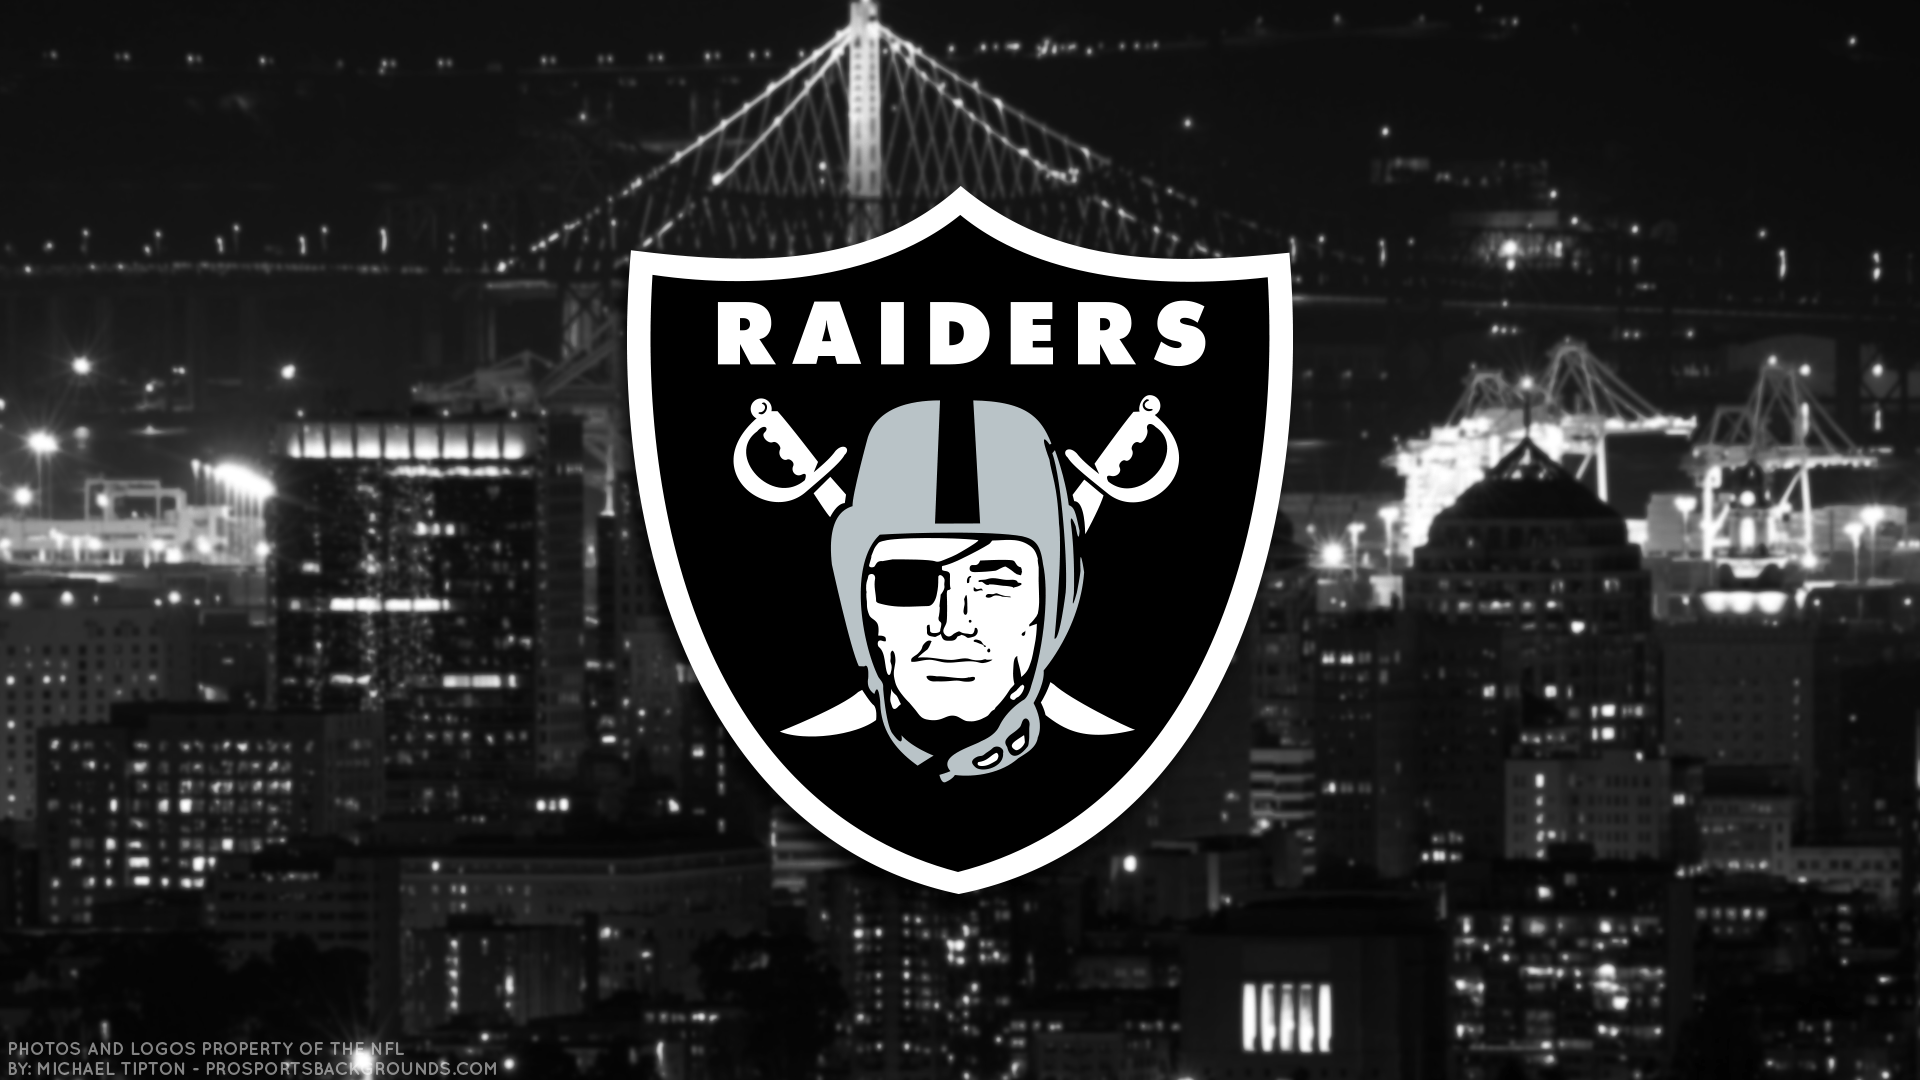 Oakland Raiders Wallpaper. iPhone. Android